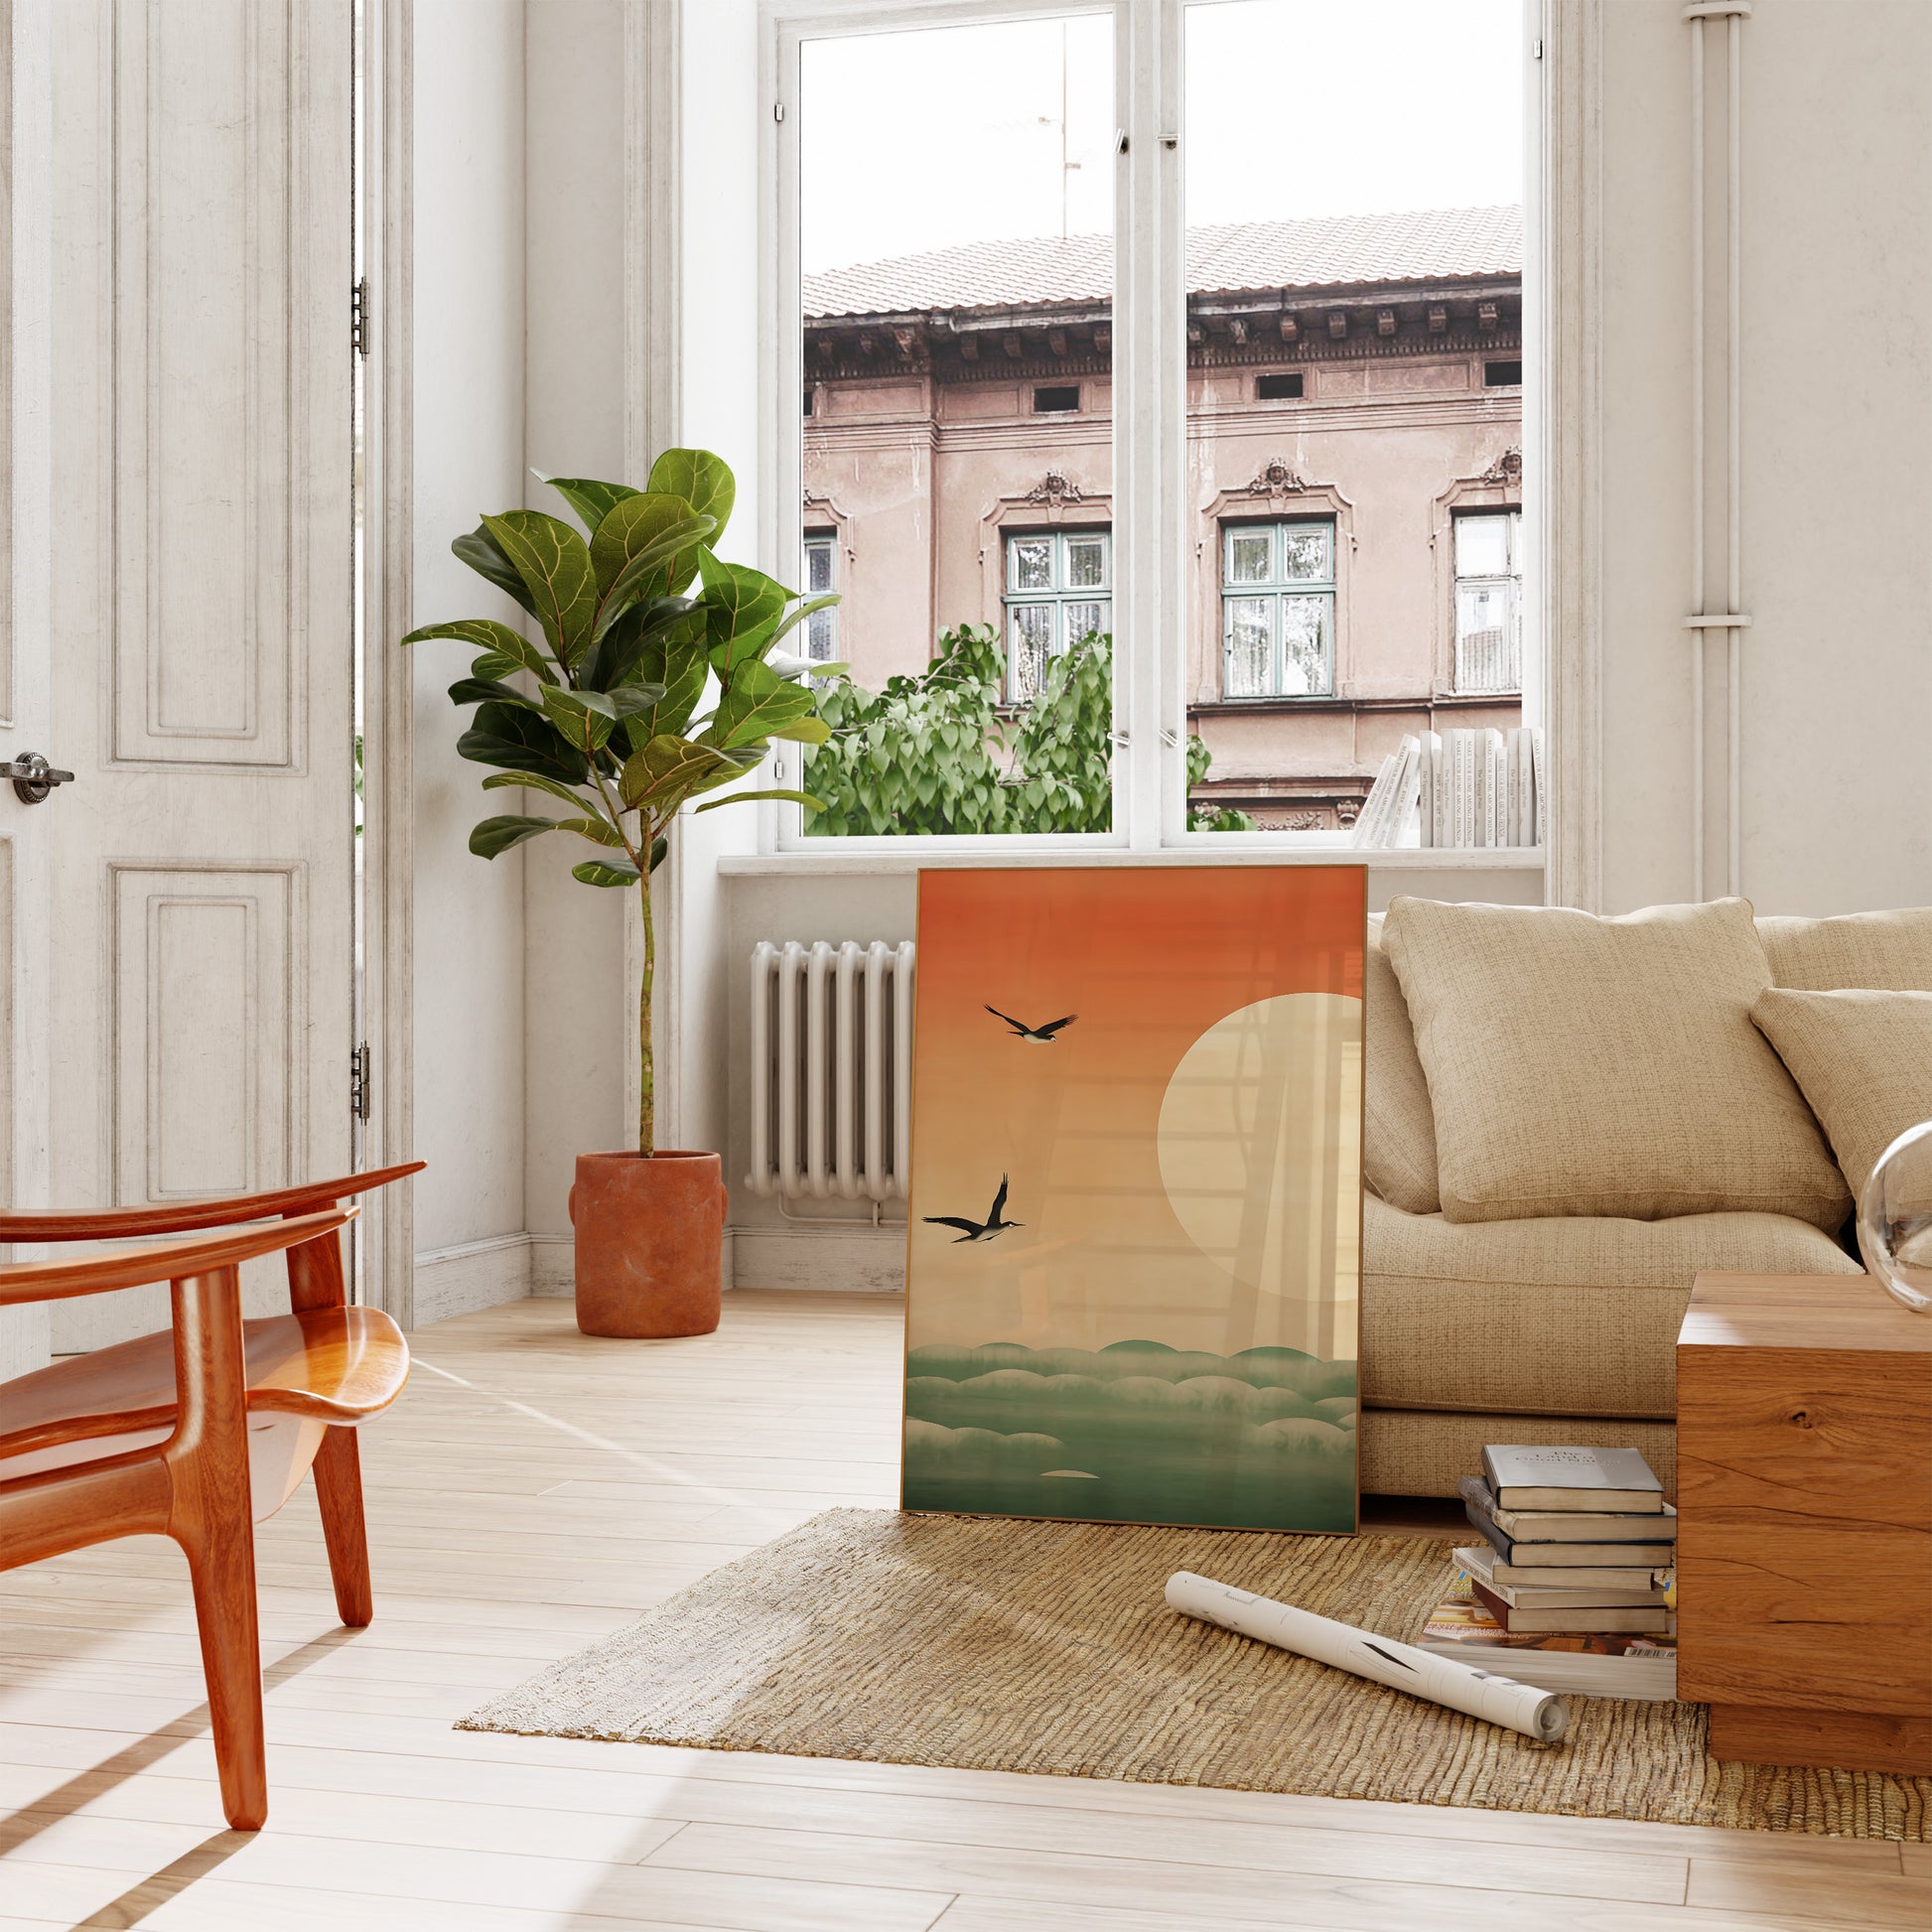 A cozy living room with a sofa, plants, and a painting, featuring an open balcony door.